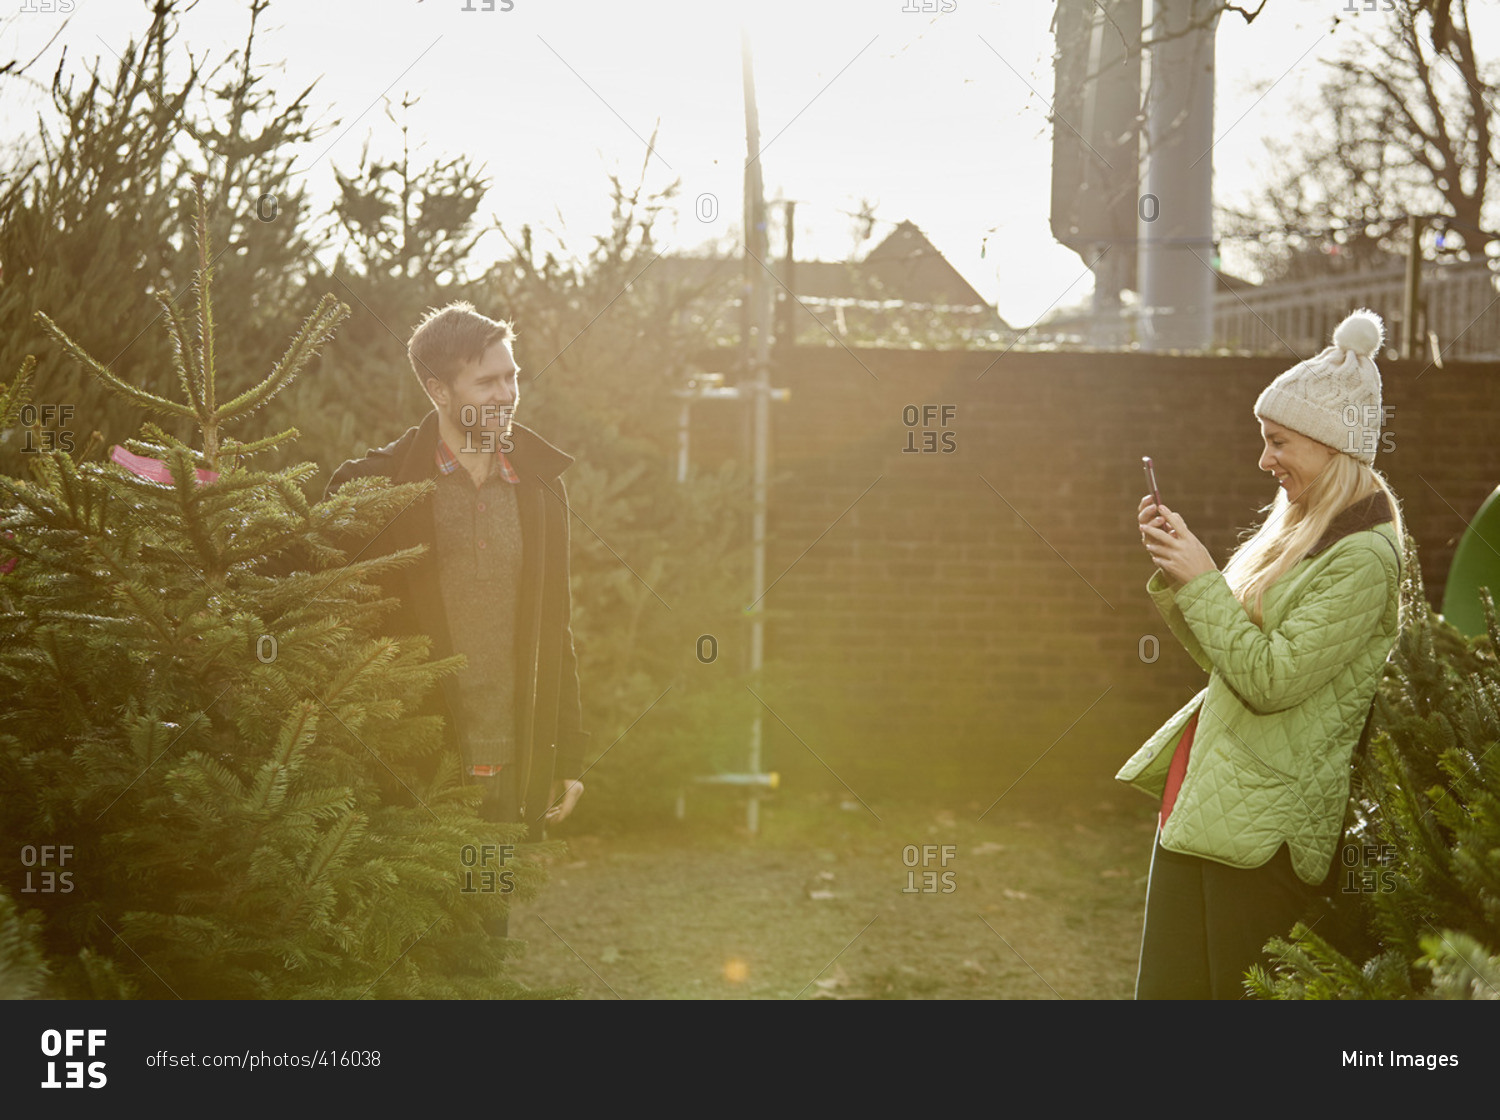 A man and woman choosing a traditional pine tree, Christmas tree from a large selection at a garden center